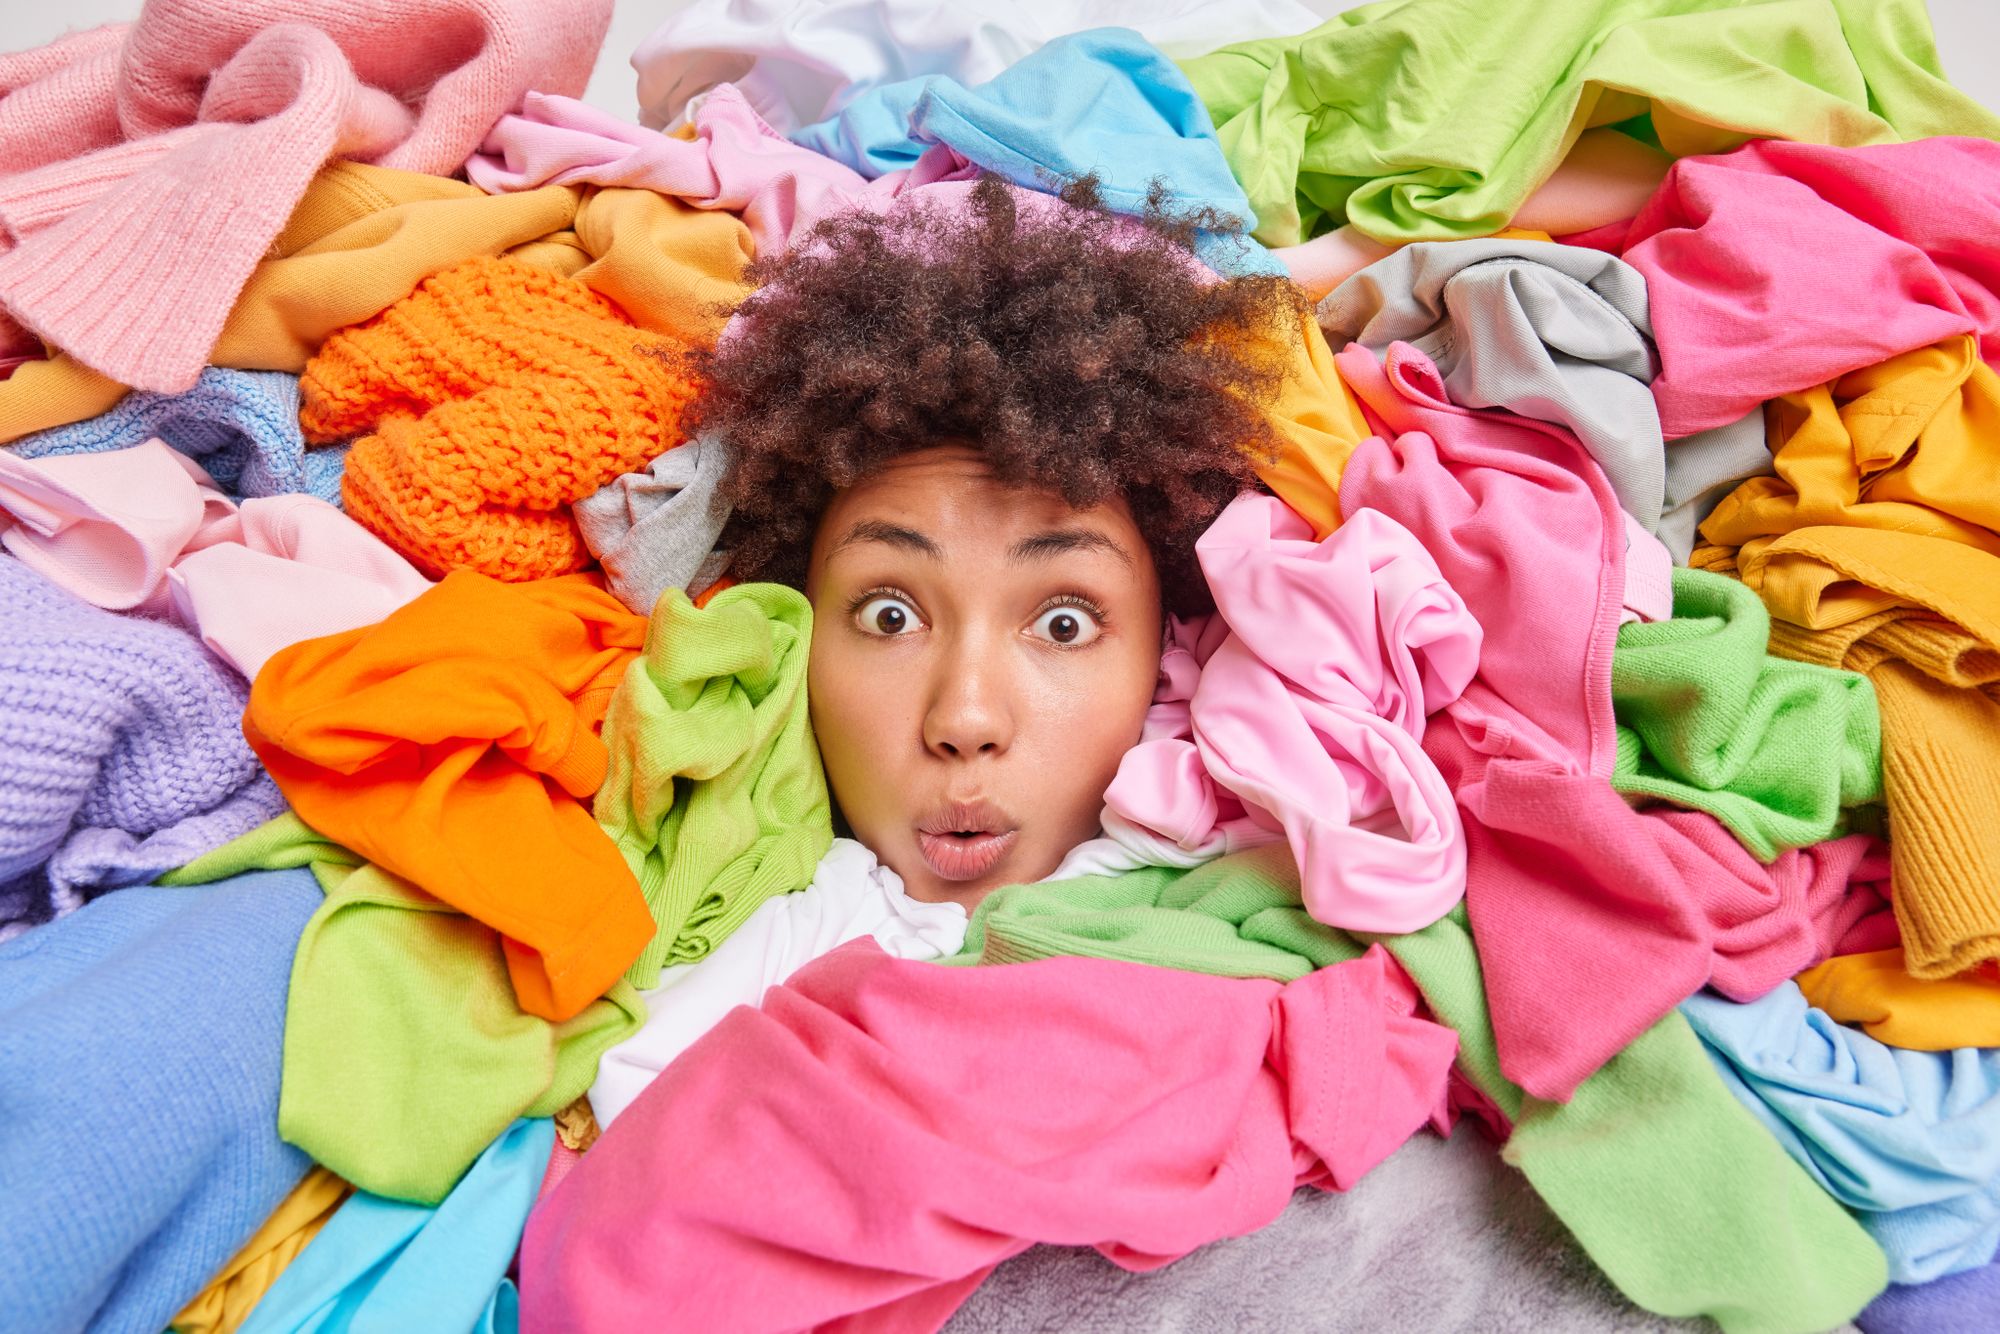 What’s your decluttering personality type?